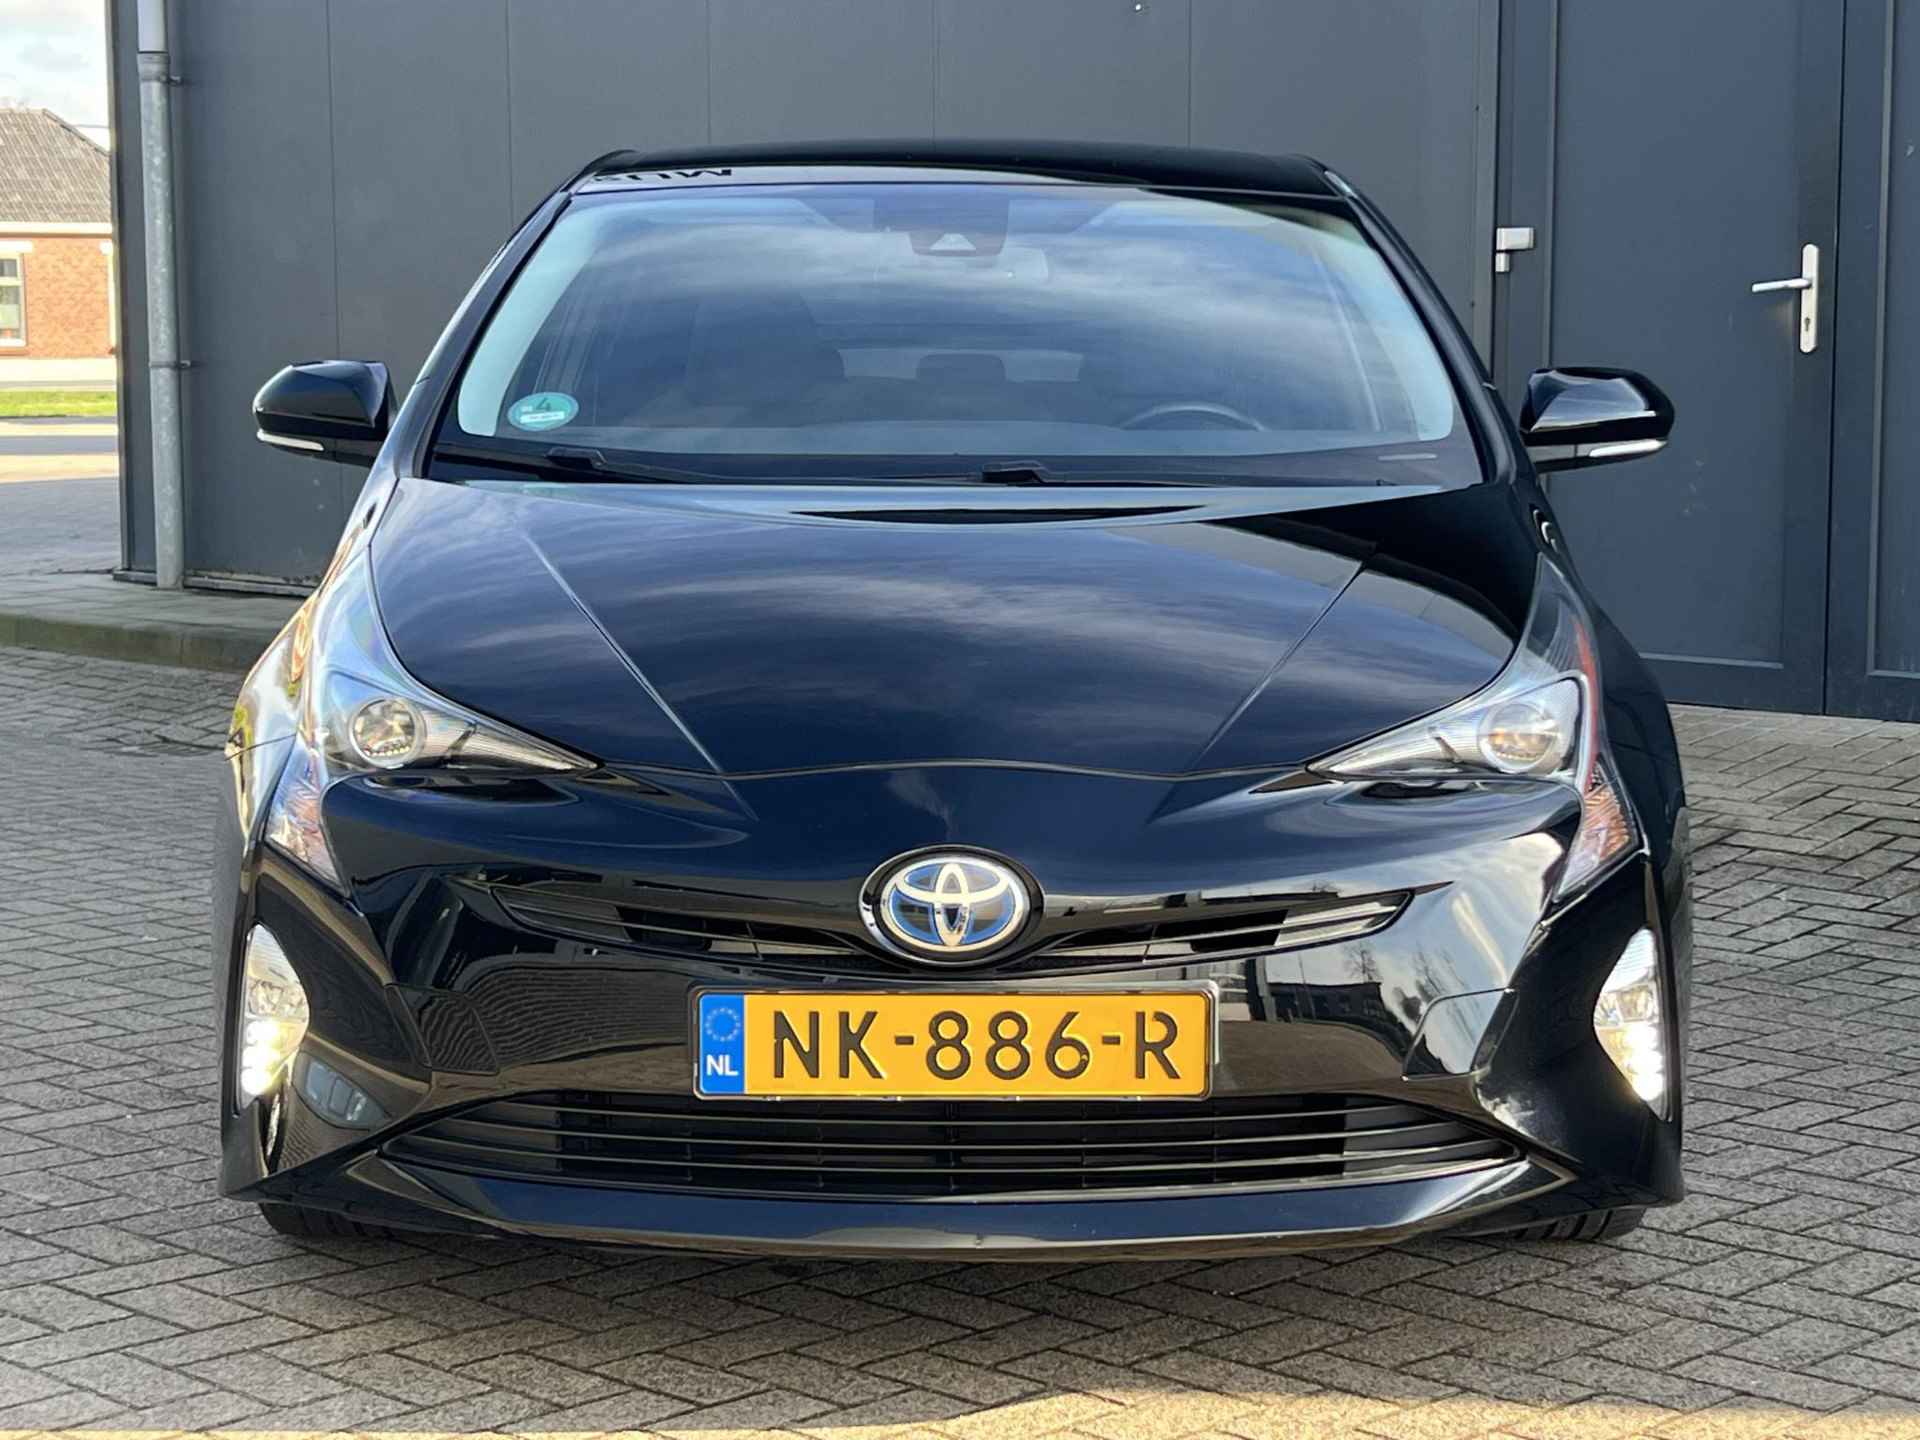 Toyota Prius 1.8 First Edition Automaat / Navigatie / Cruise Control / Climate Control / Stoelverwarming / DAB / Bluetooth / Head-Up Display / Dodehoek Herkenning / Camera - 4/30